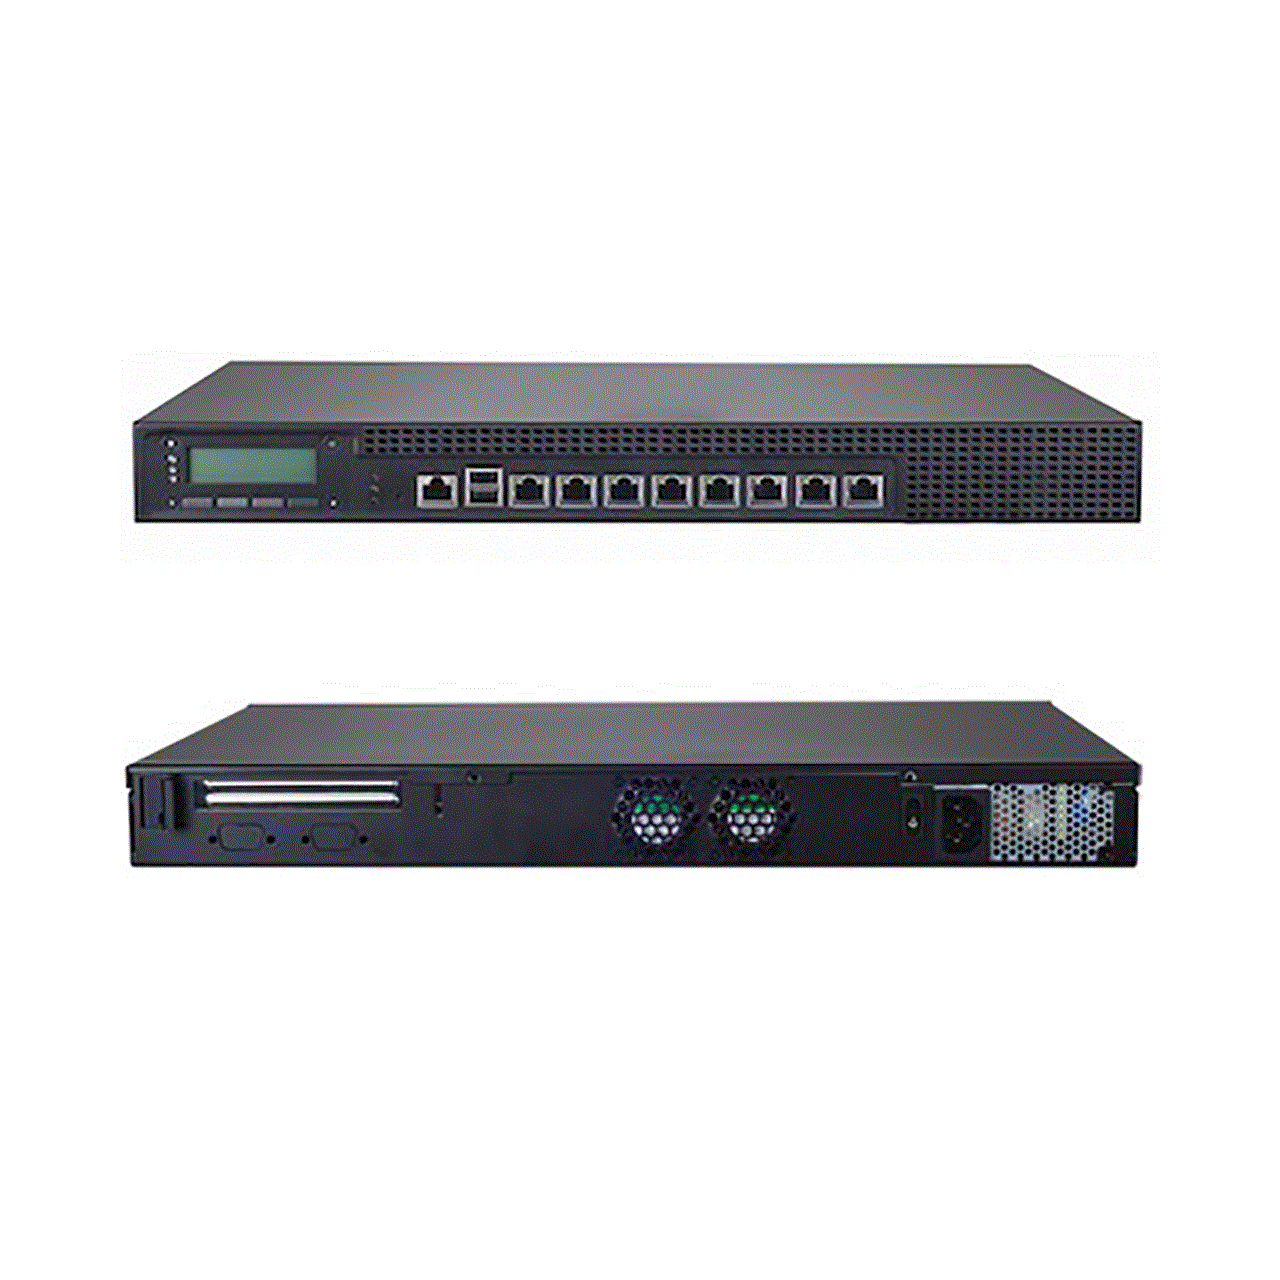 rackmount-network-security-appliance-based-on-4th-gen-i7-and-c226-chipset